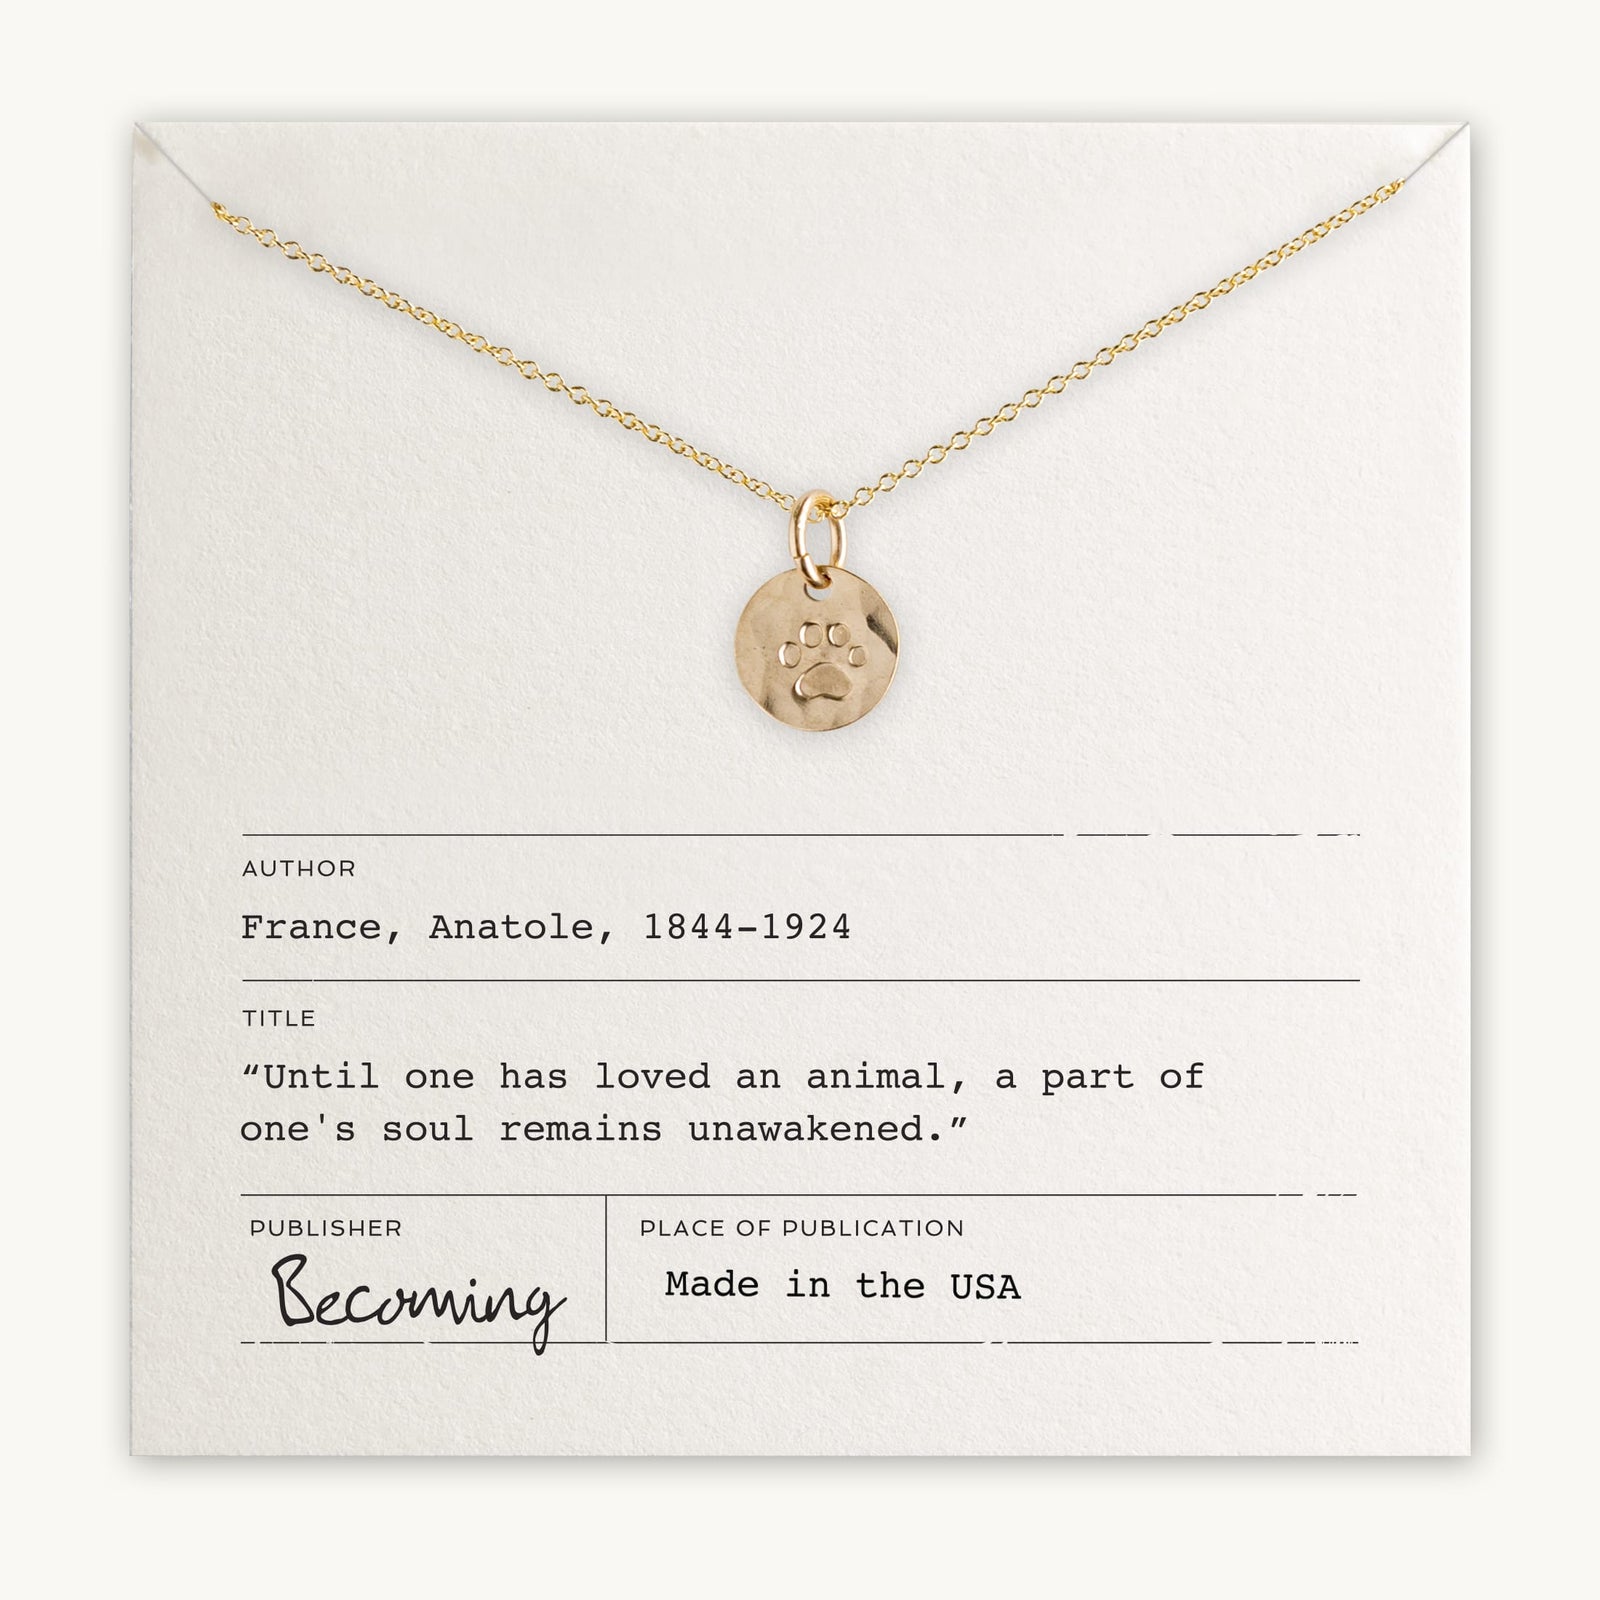 Becoming Jewelry's Paw Print Necklace displayed on a card with a quote about loving an animal, attributed to Anatole France.